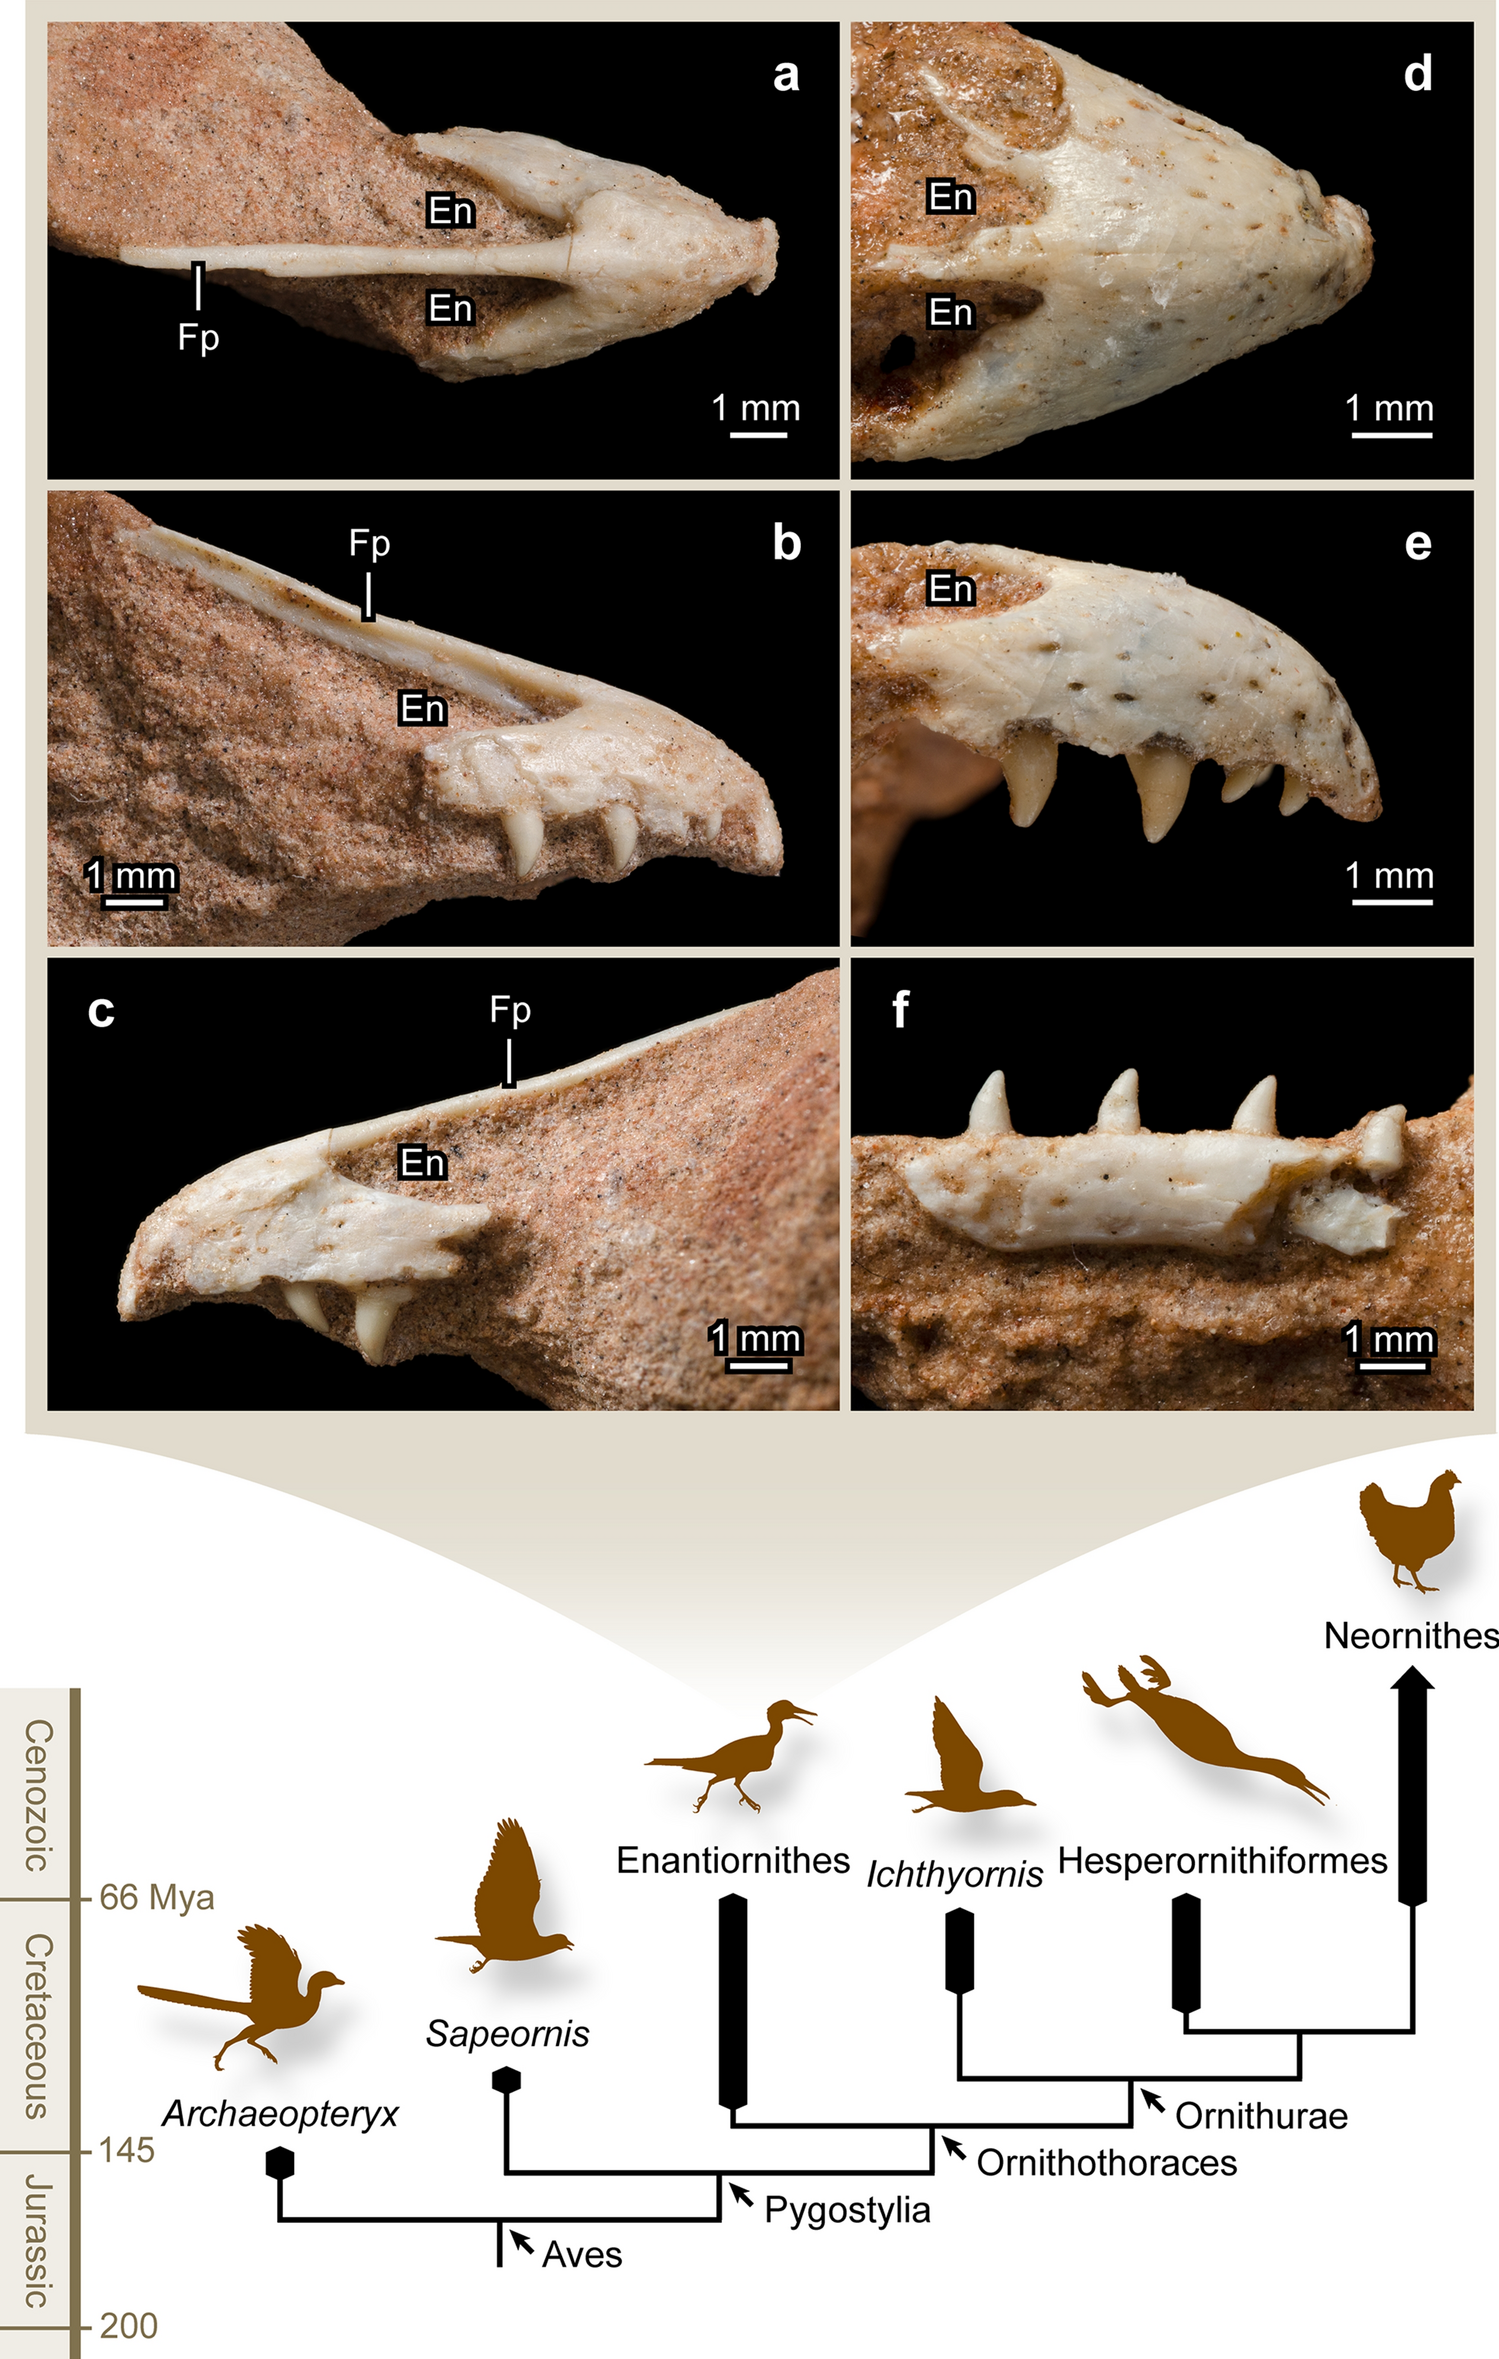 Dental replacement in Mesozoic birds: evidence from newly discovered  Brazilian enantiornithines | Scientific Reports